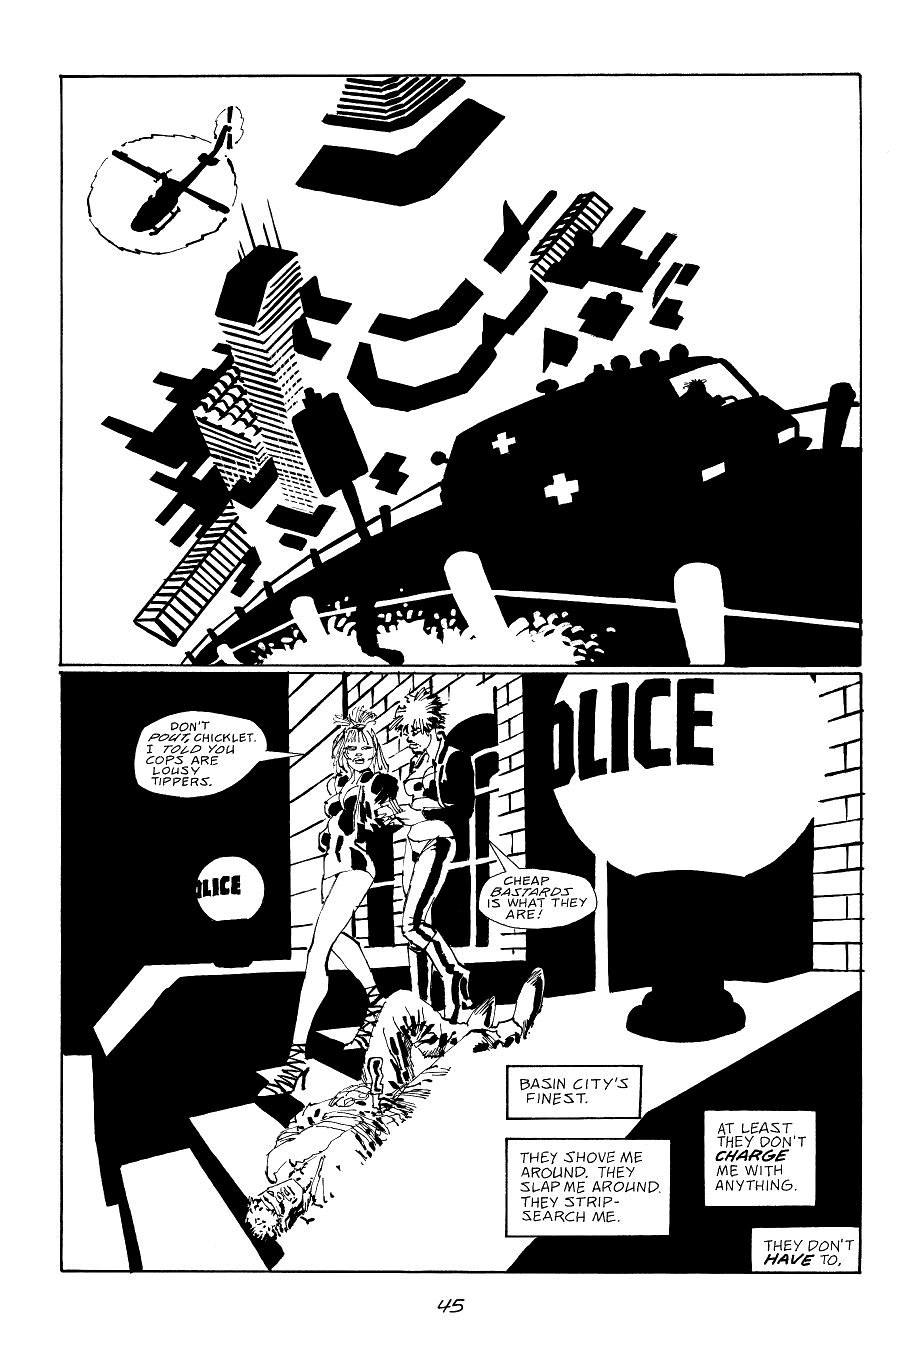 page 45 of sin city 7 hell and back